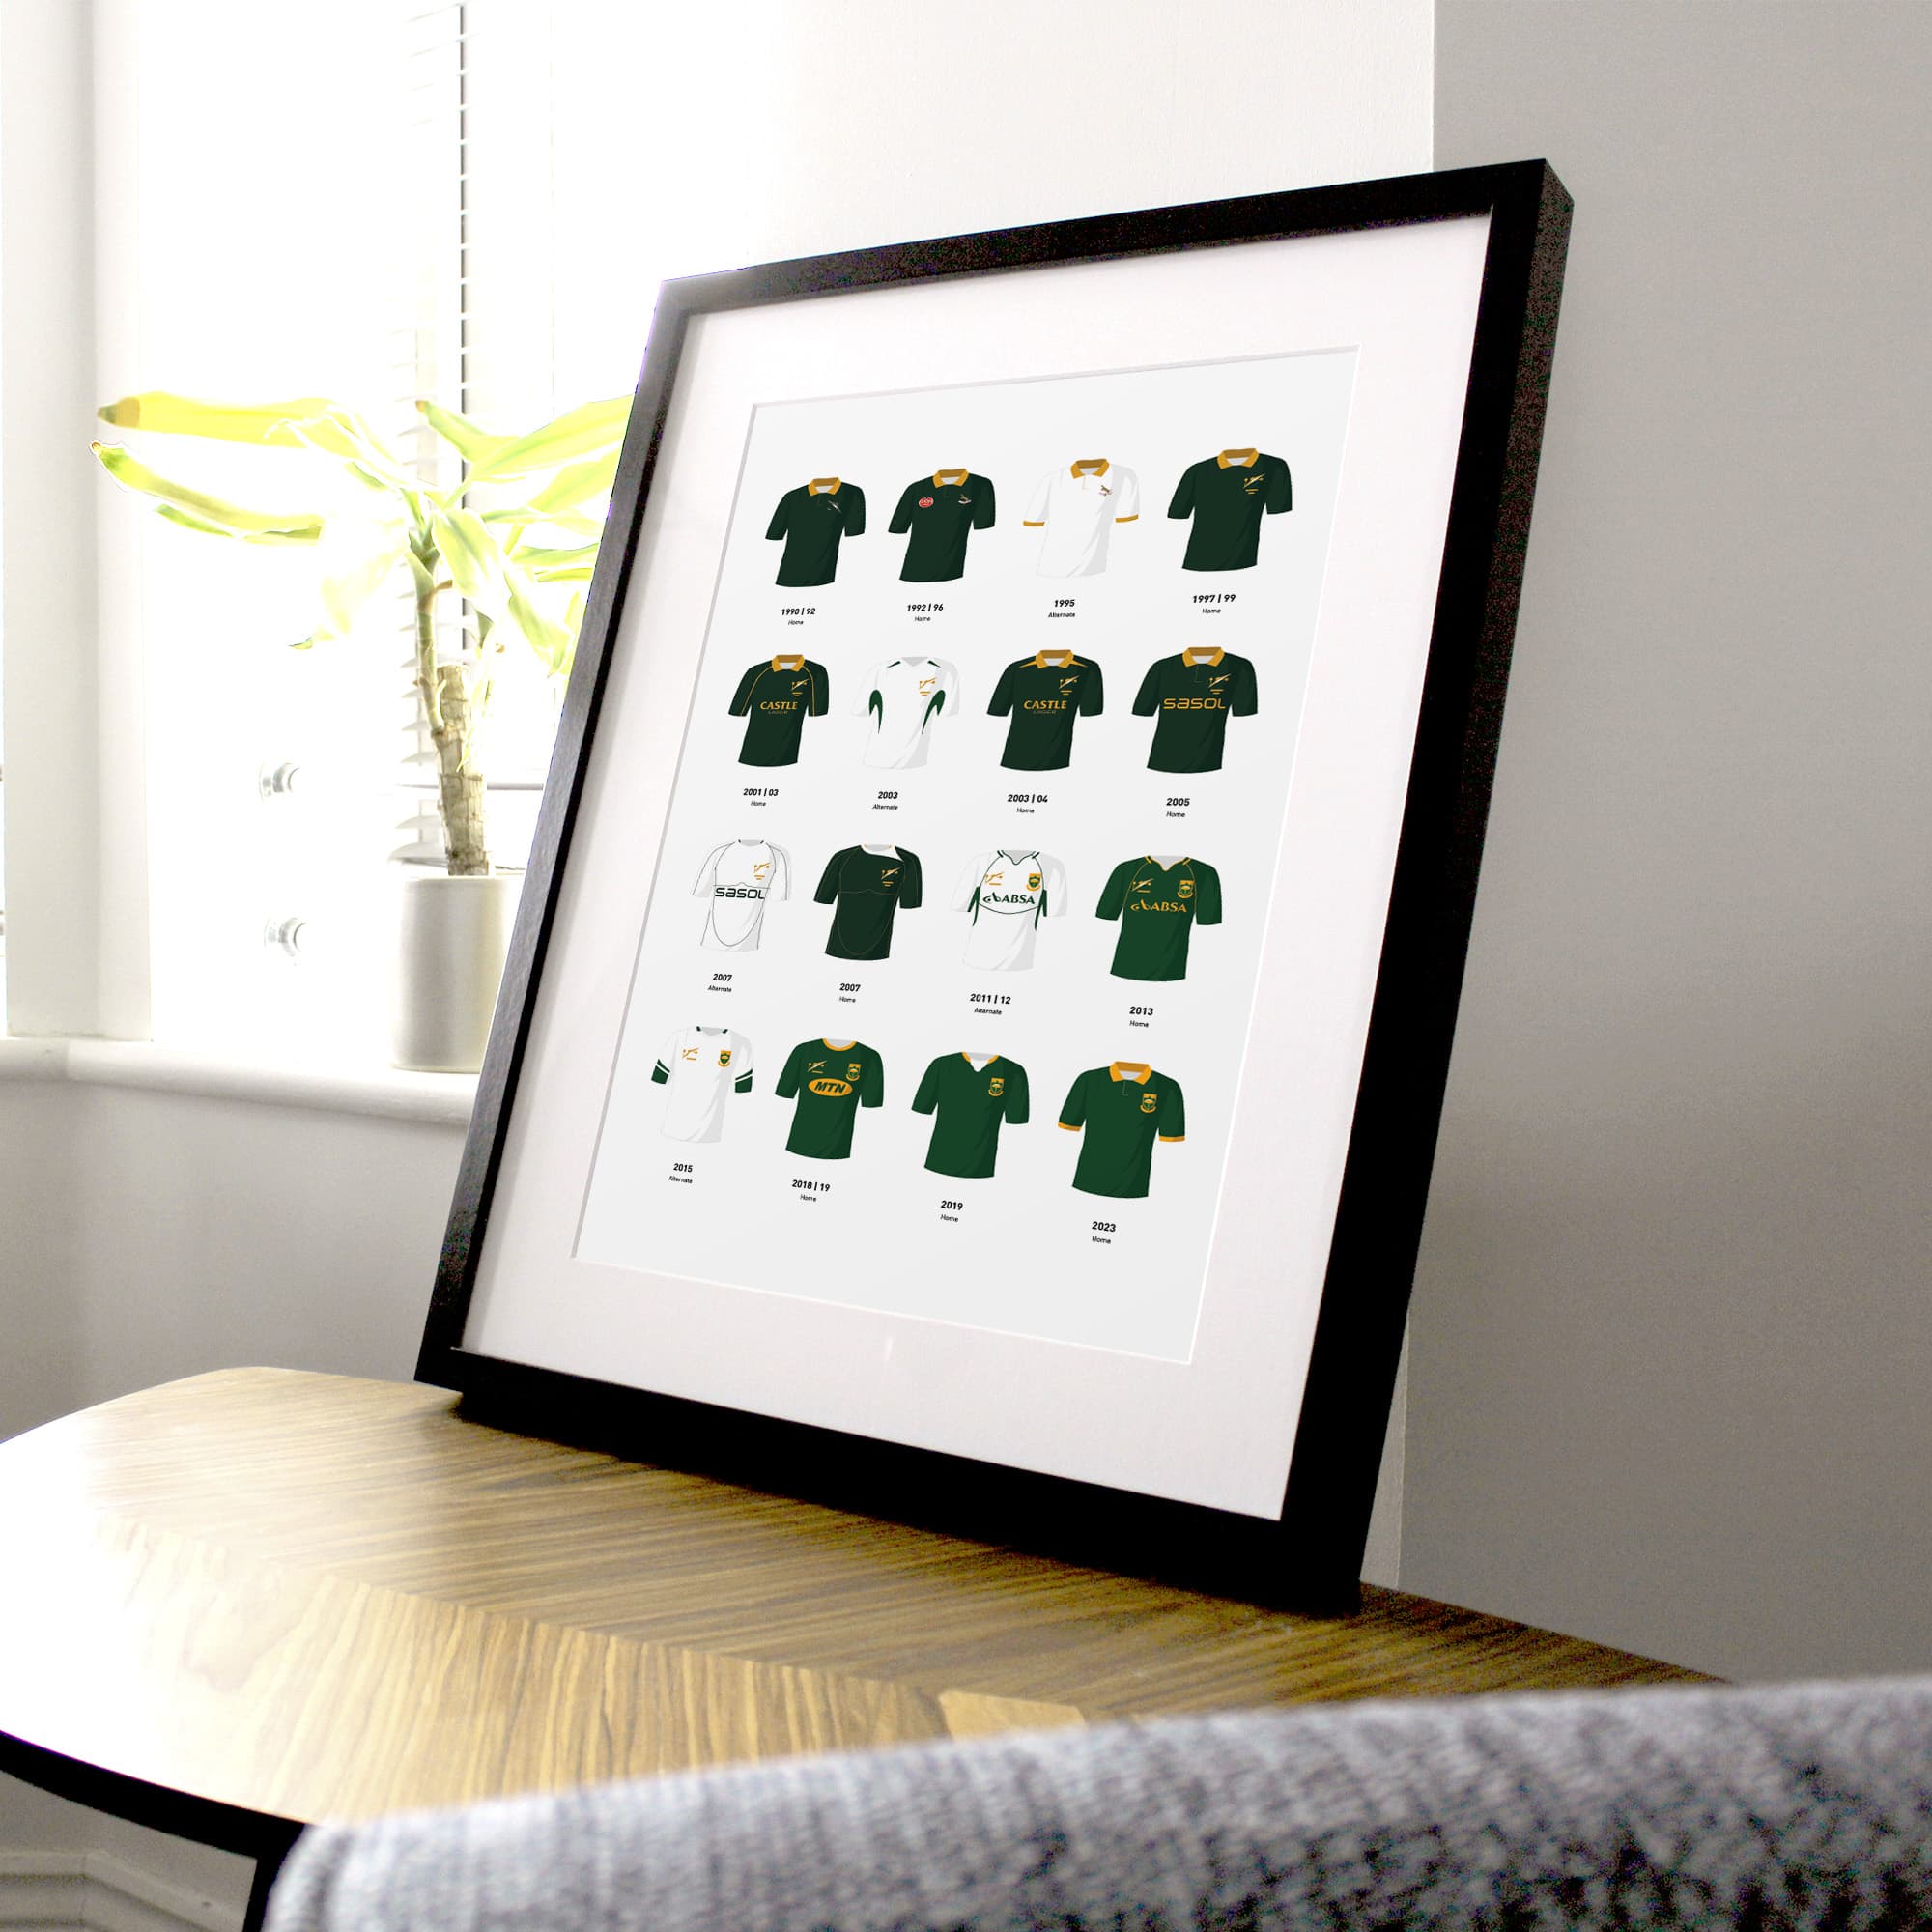 South Africa Classic Kits Rugby Union Team Print